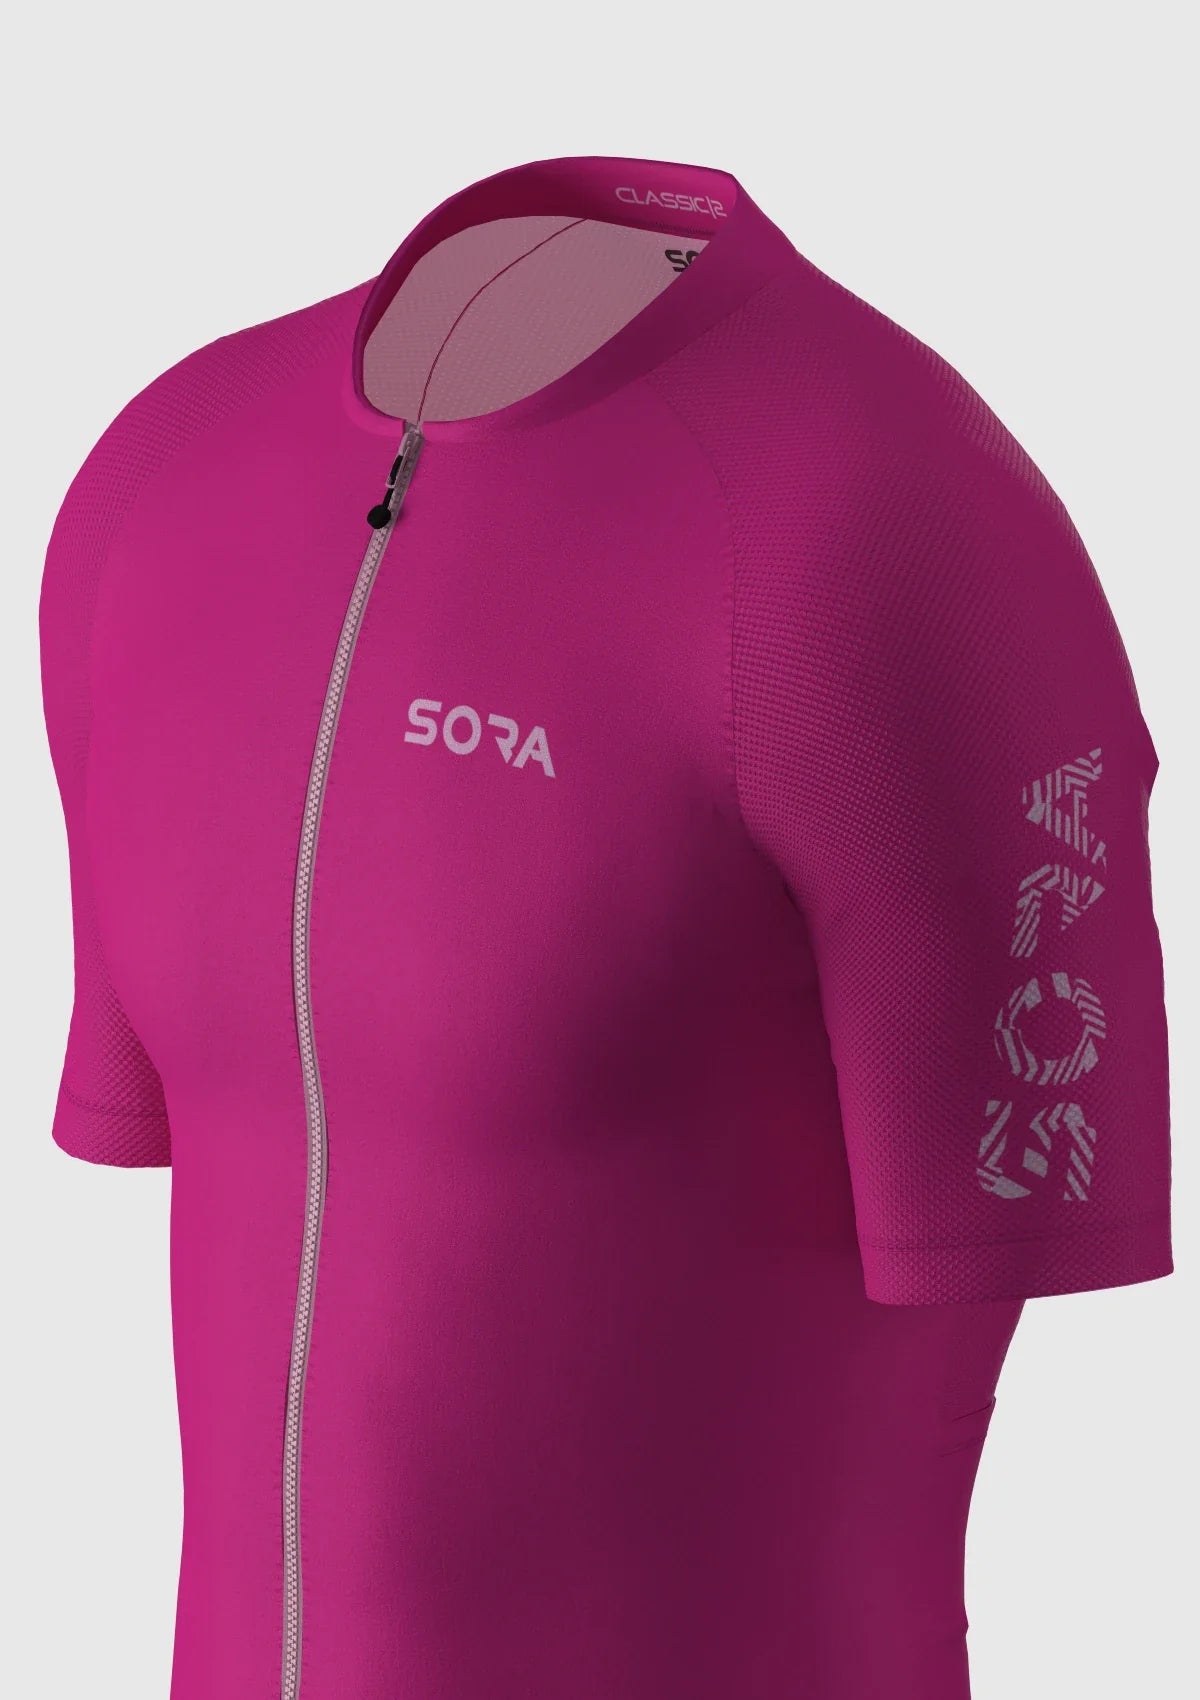 Classic Pink cycling jersey